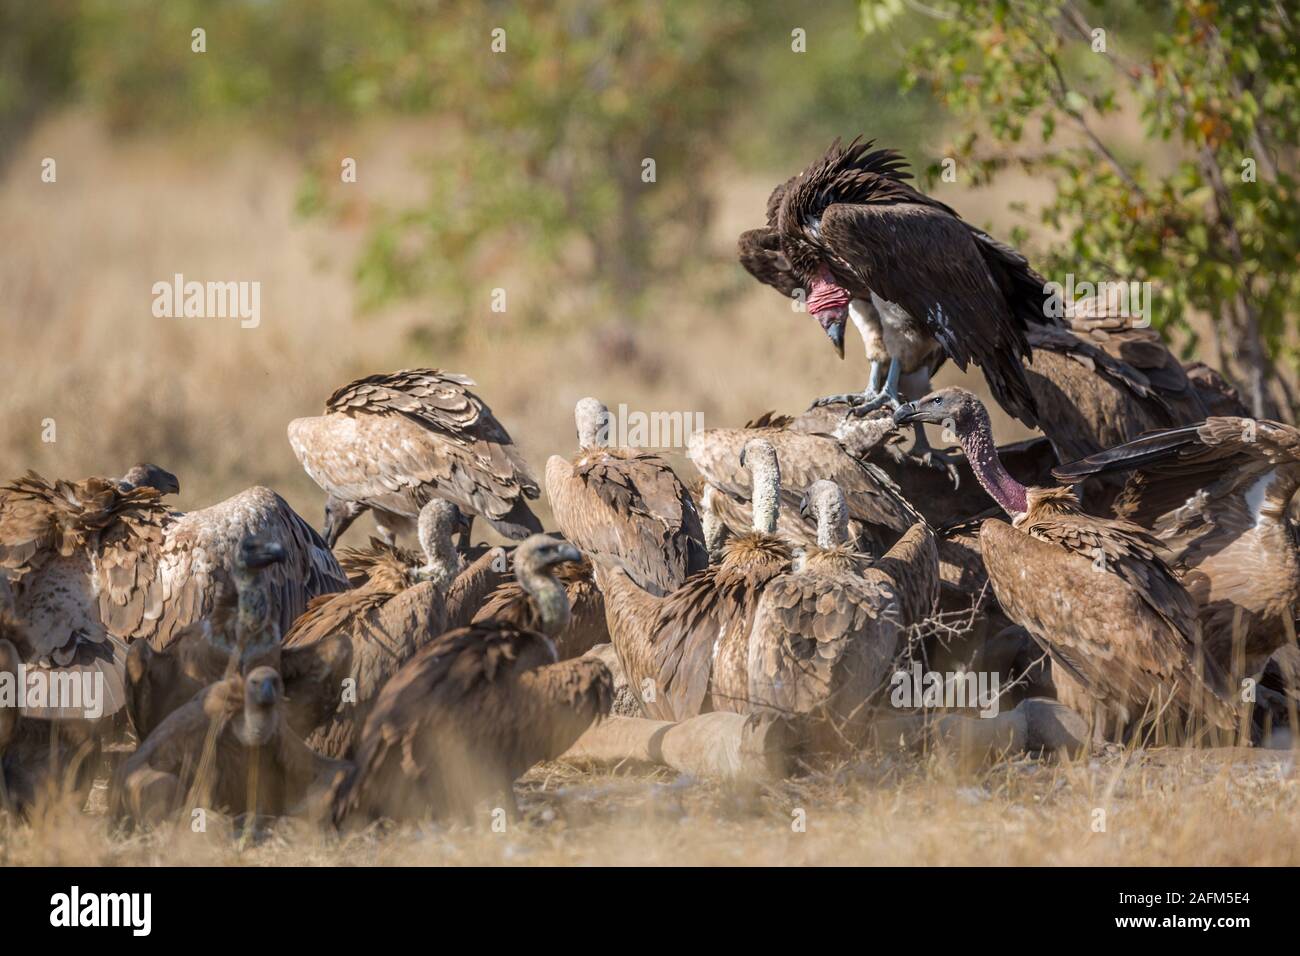 Lappet faced and white backed Vultures on carcass in Kruger National park, South Africa ; Specie  Torgos tracheliotos and Gyps africanus family of Acc Stock Photo